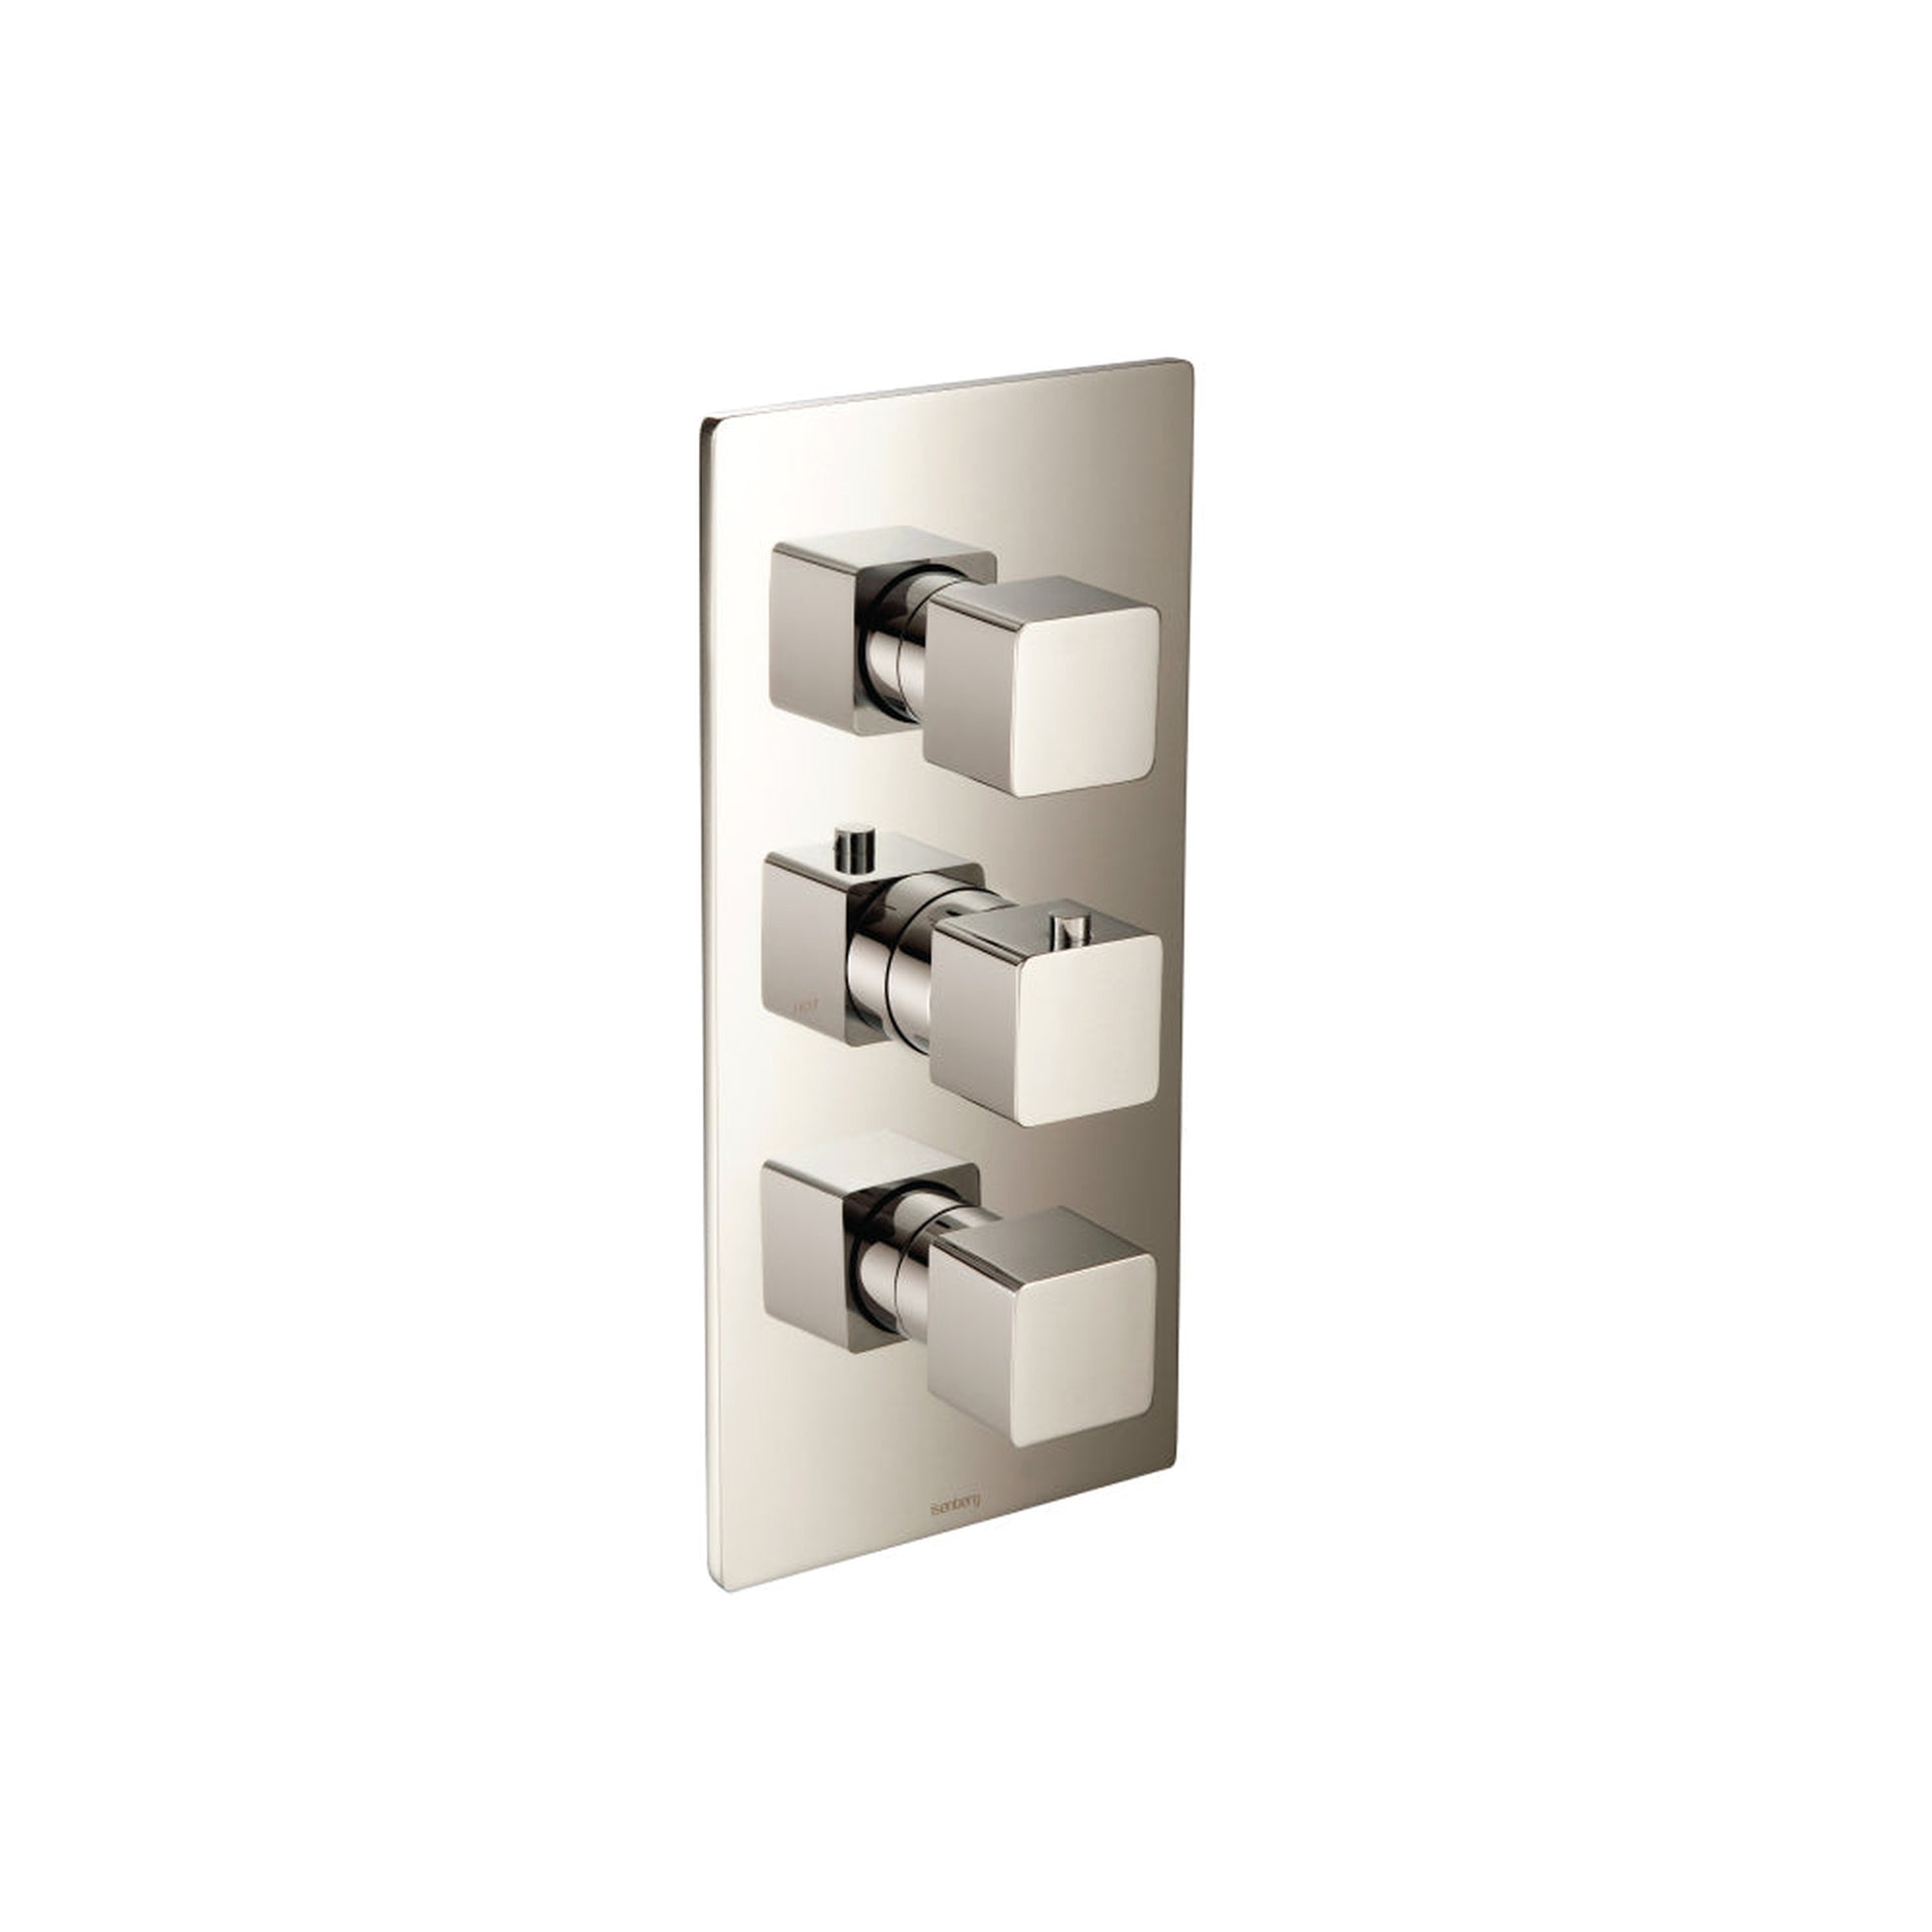 Isenberg Serie 196 3/4" Three Output Thermostatic Valve With Trim in Polished Nickel (196.4501PN)